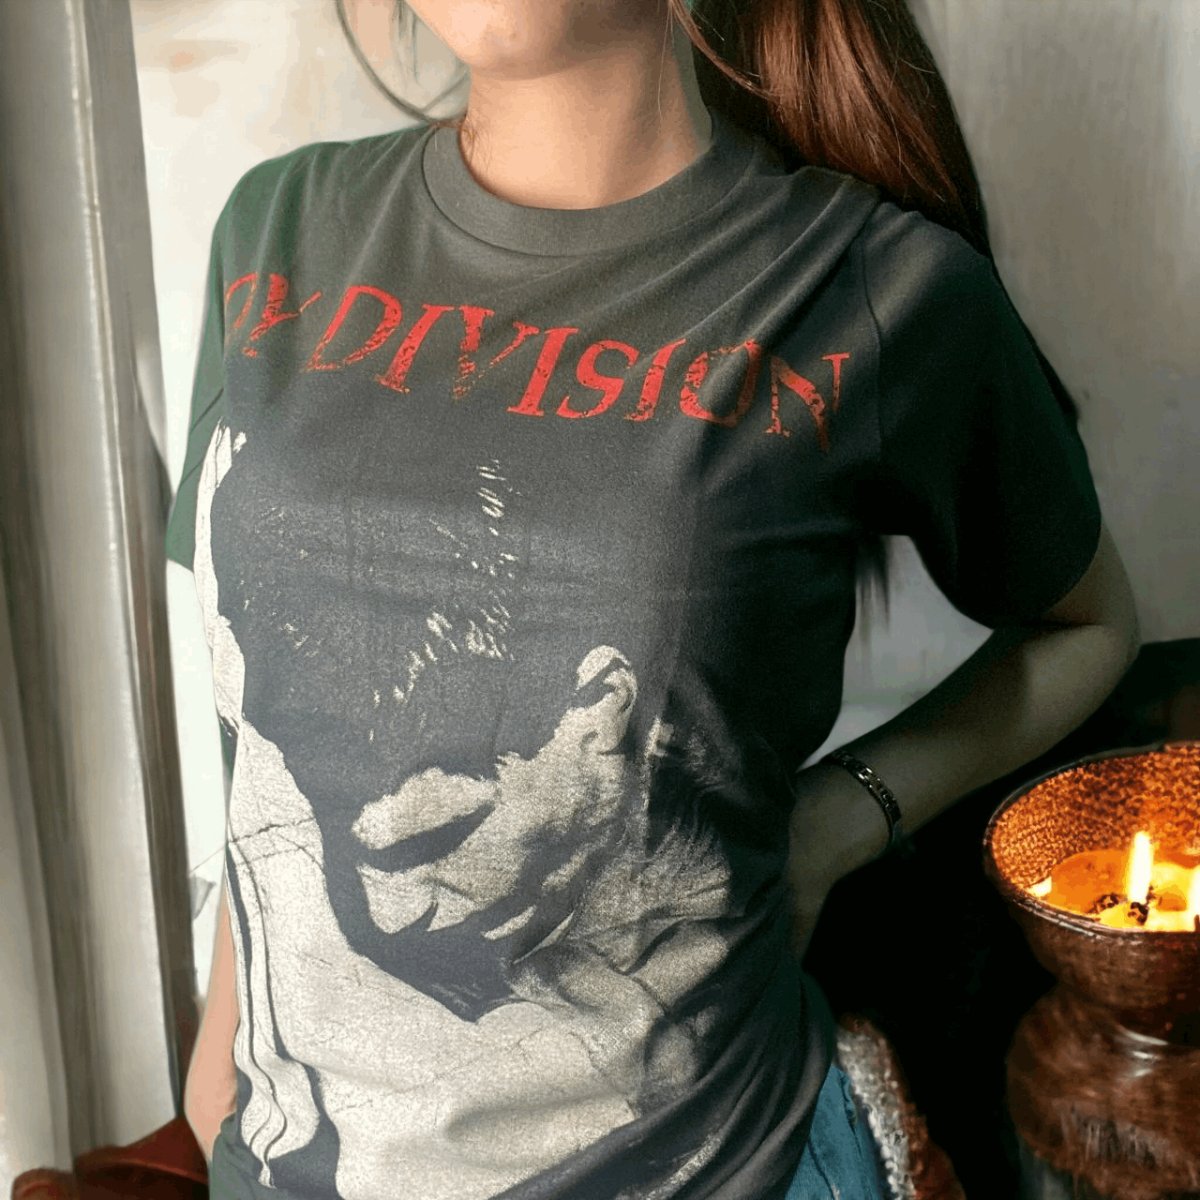 Joy Division Tribute T-Shirt: A Fusion of Iconic Imagery and Vintage Style - Vintage Band Shirts